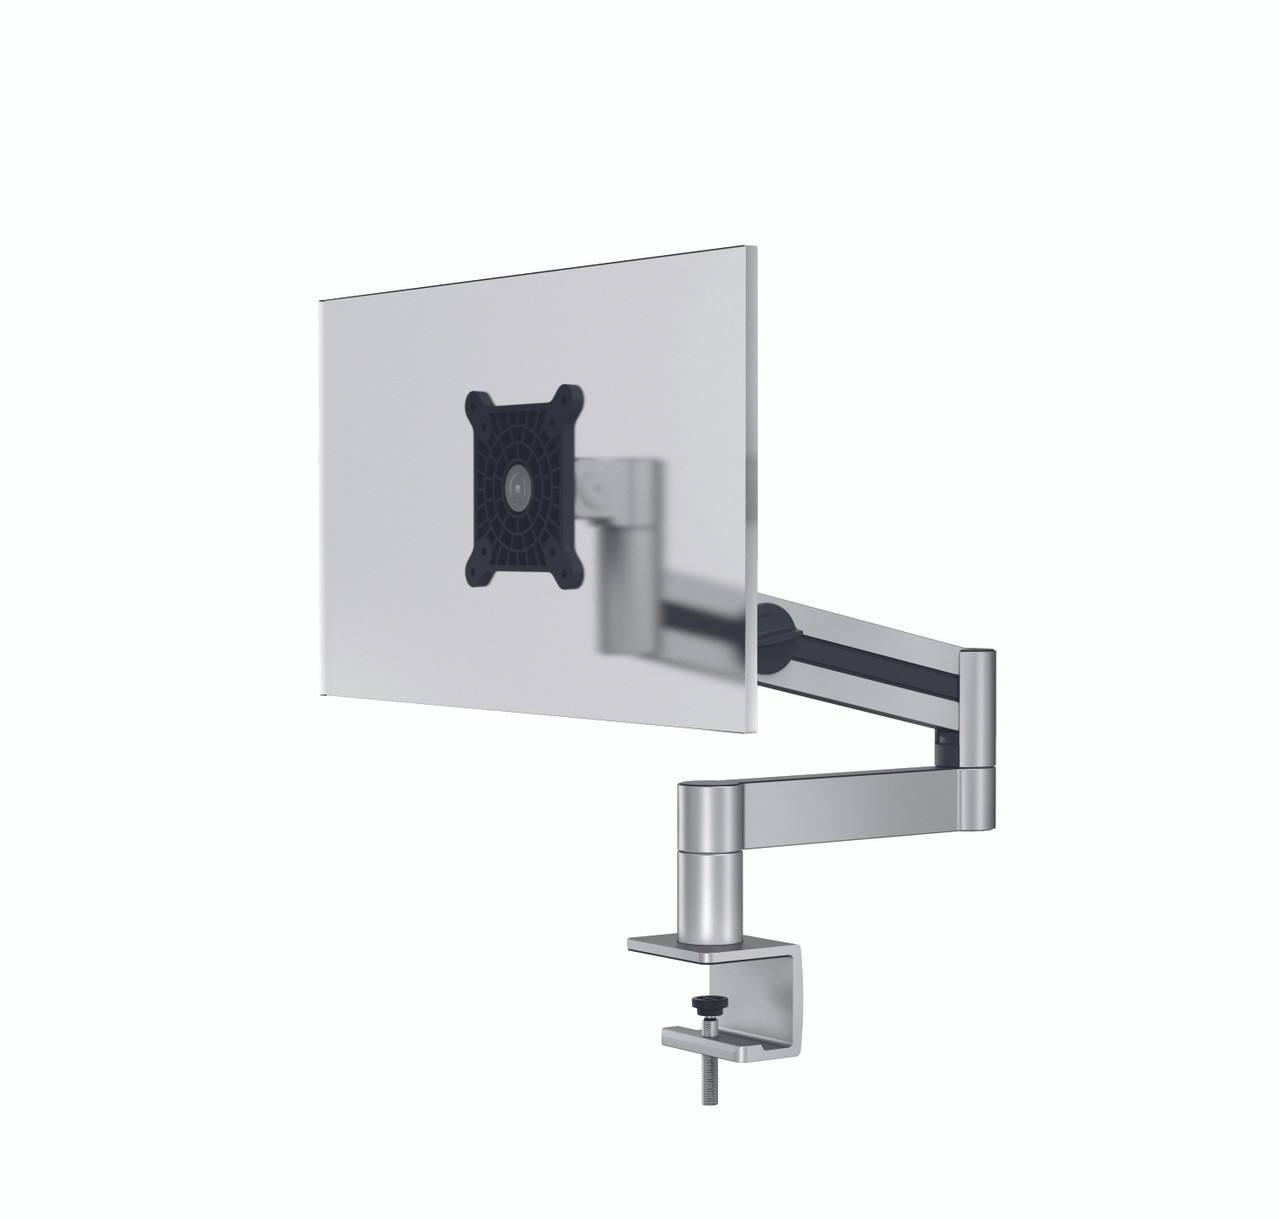 DURABLE Monitor Mount with Arm for 1 Screen, Desk Clamp